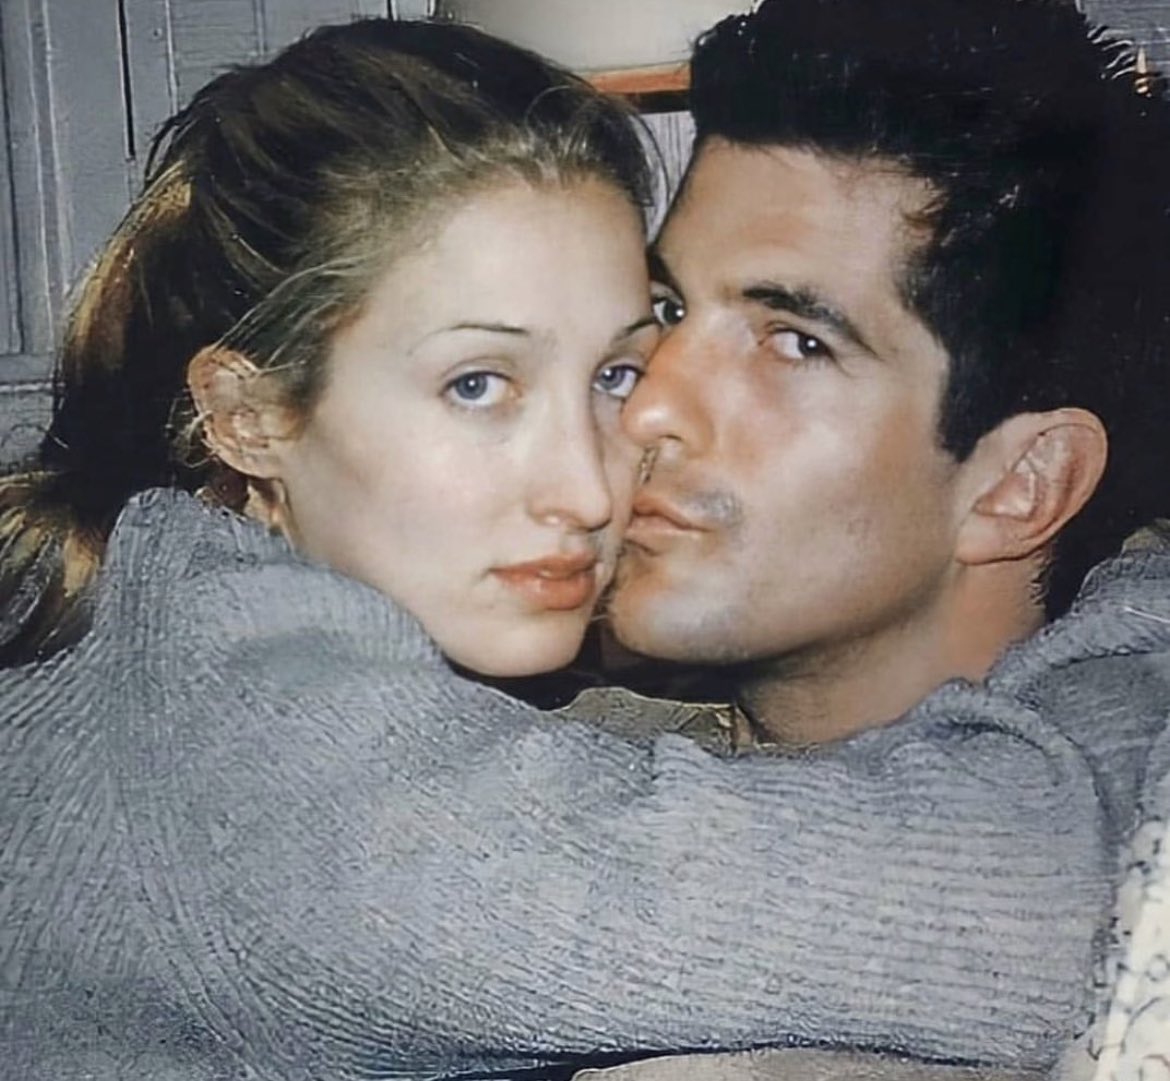 It's been 24 years today that John F. Kennedy Jr., his wife, Carolyn Bessette Kennedy, and her sister, Lauren Bessette, took off on a humid, windy, and hazy night in a single-engine Piper 32 Saratoga aircraft from Caldwell, N.J., en route to the Martha's Vineyard Airport, but